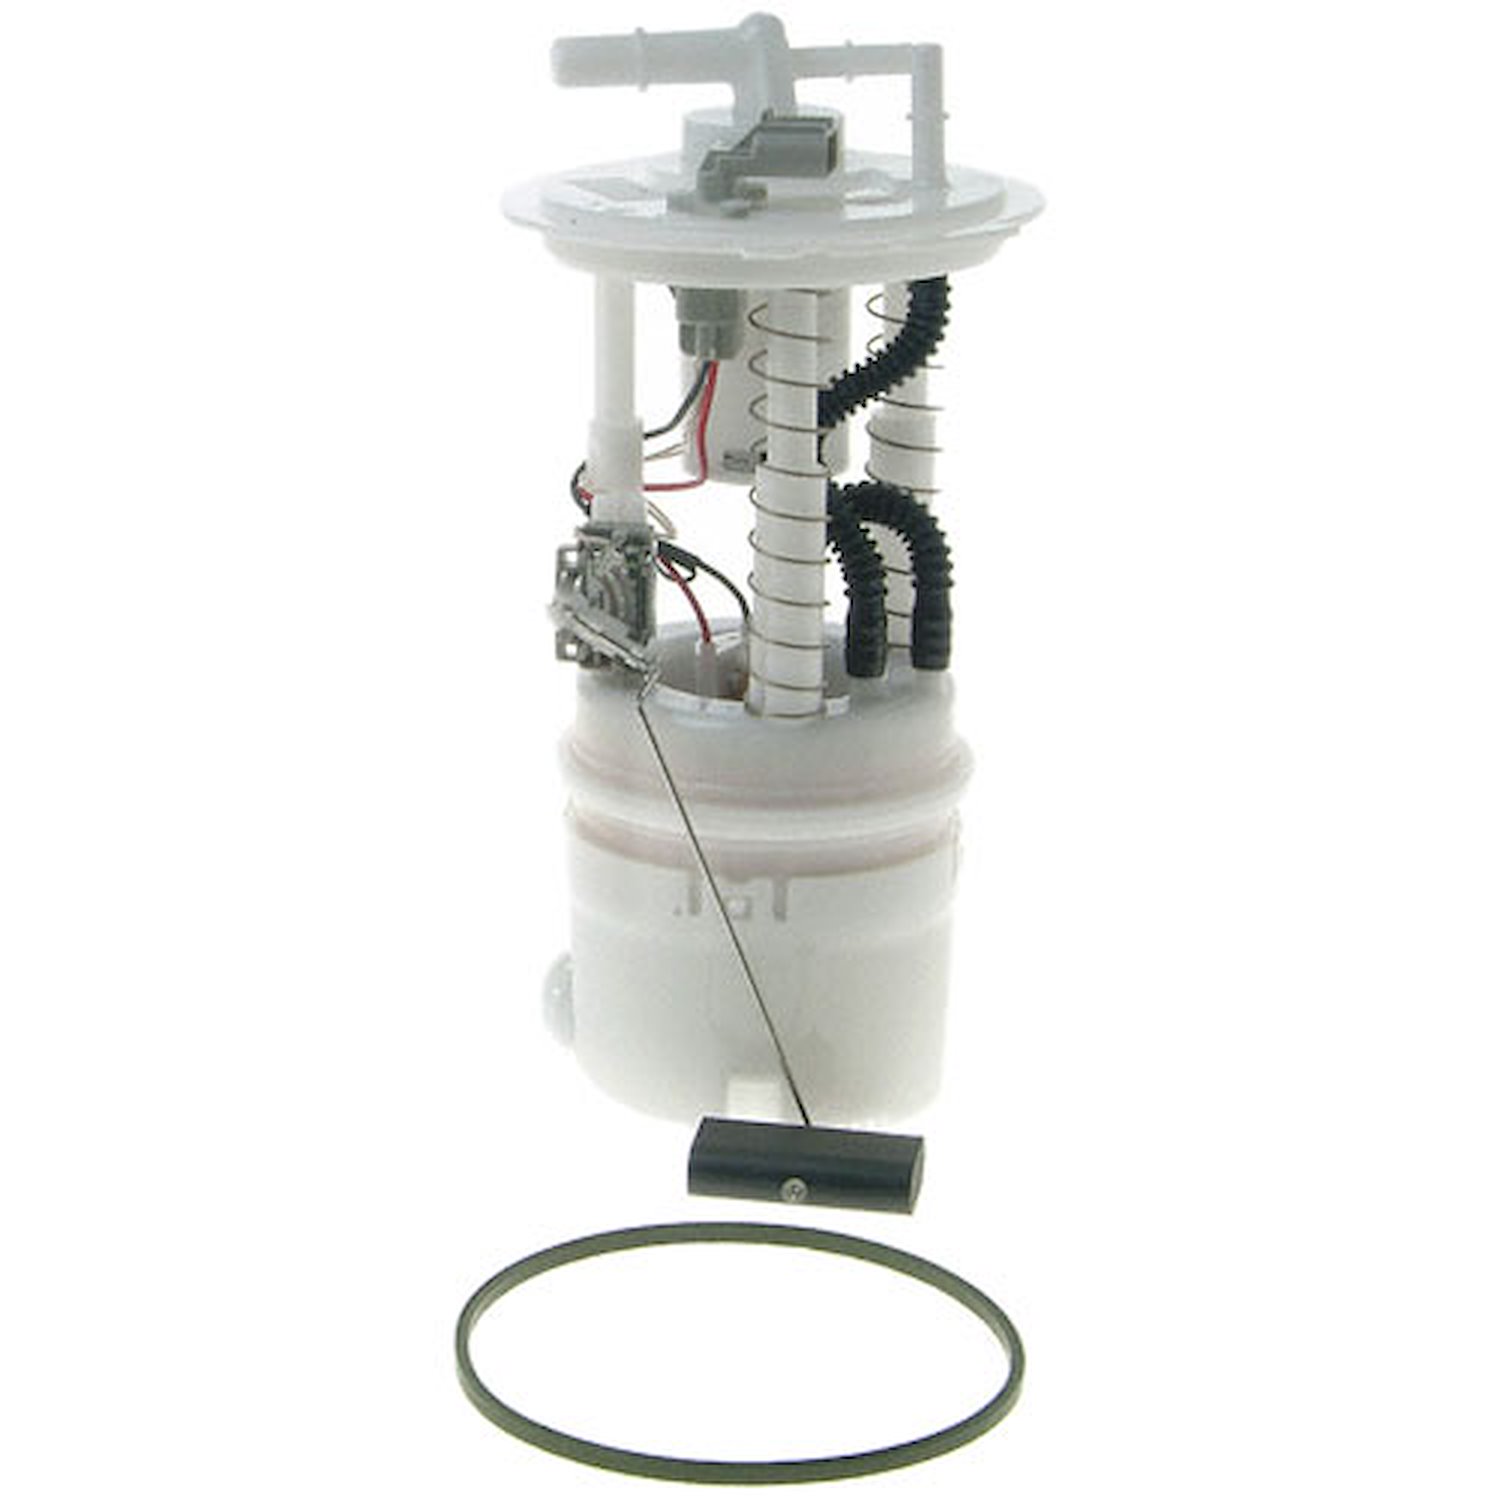 OE Chrysler/Dodge Replacement Electric Fuel Pump Module Assembly 2004-06 Chrysler Sebring 2.4L/2.7L 4 Cyl